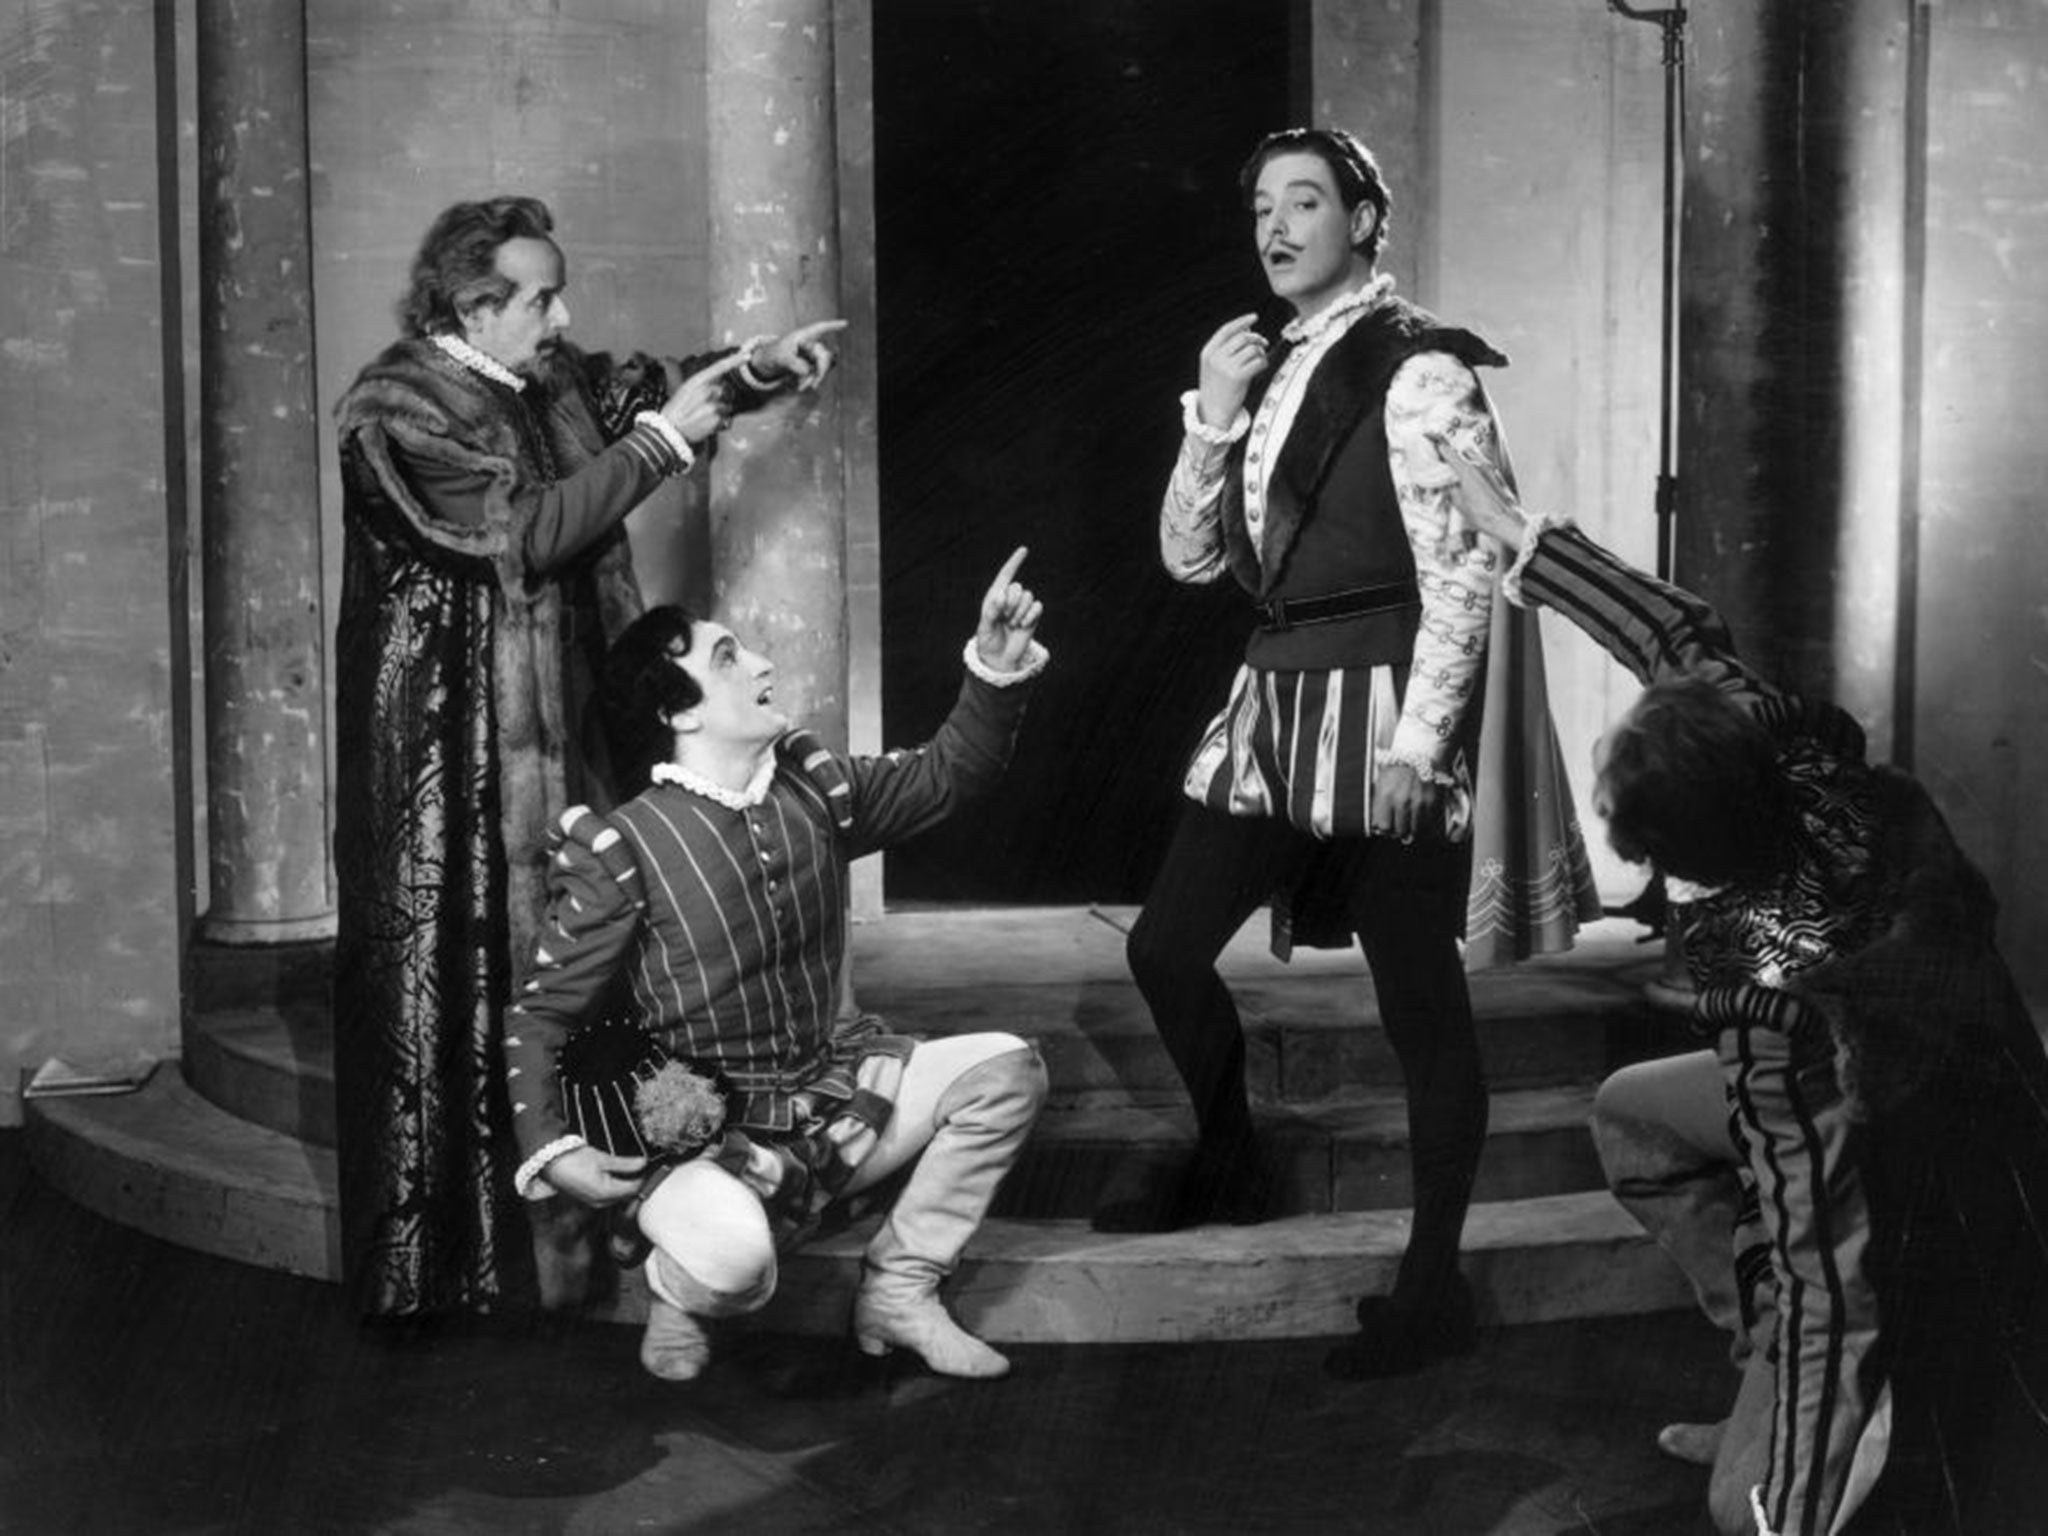 English actor Robert Donat, second from right, as 'Benedick' in a production at the Aldwych Theatre, London in 1946